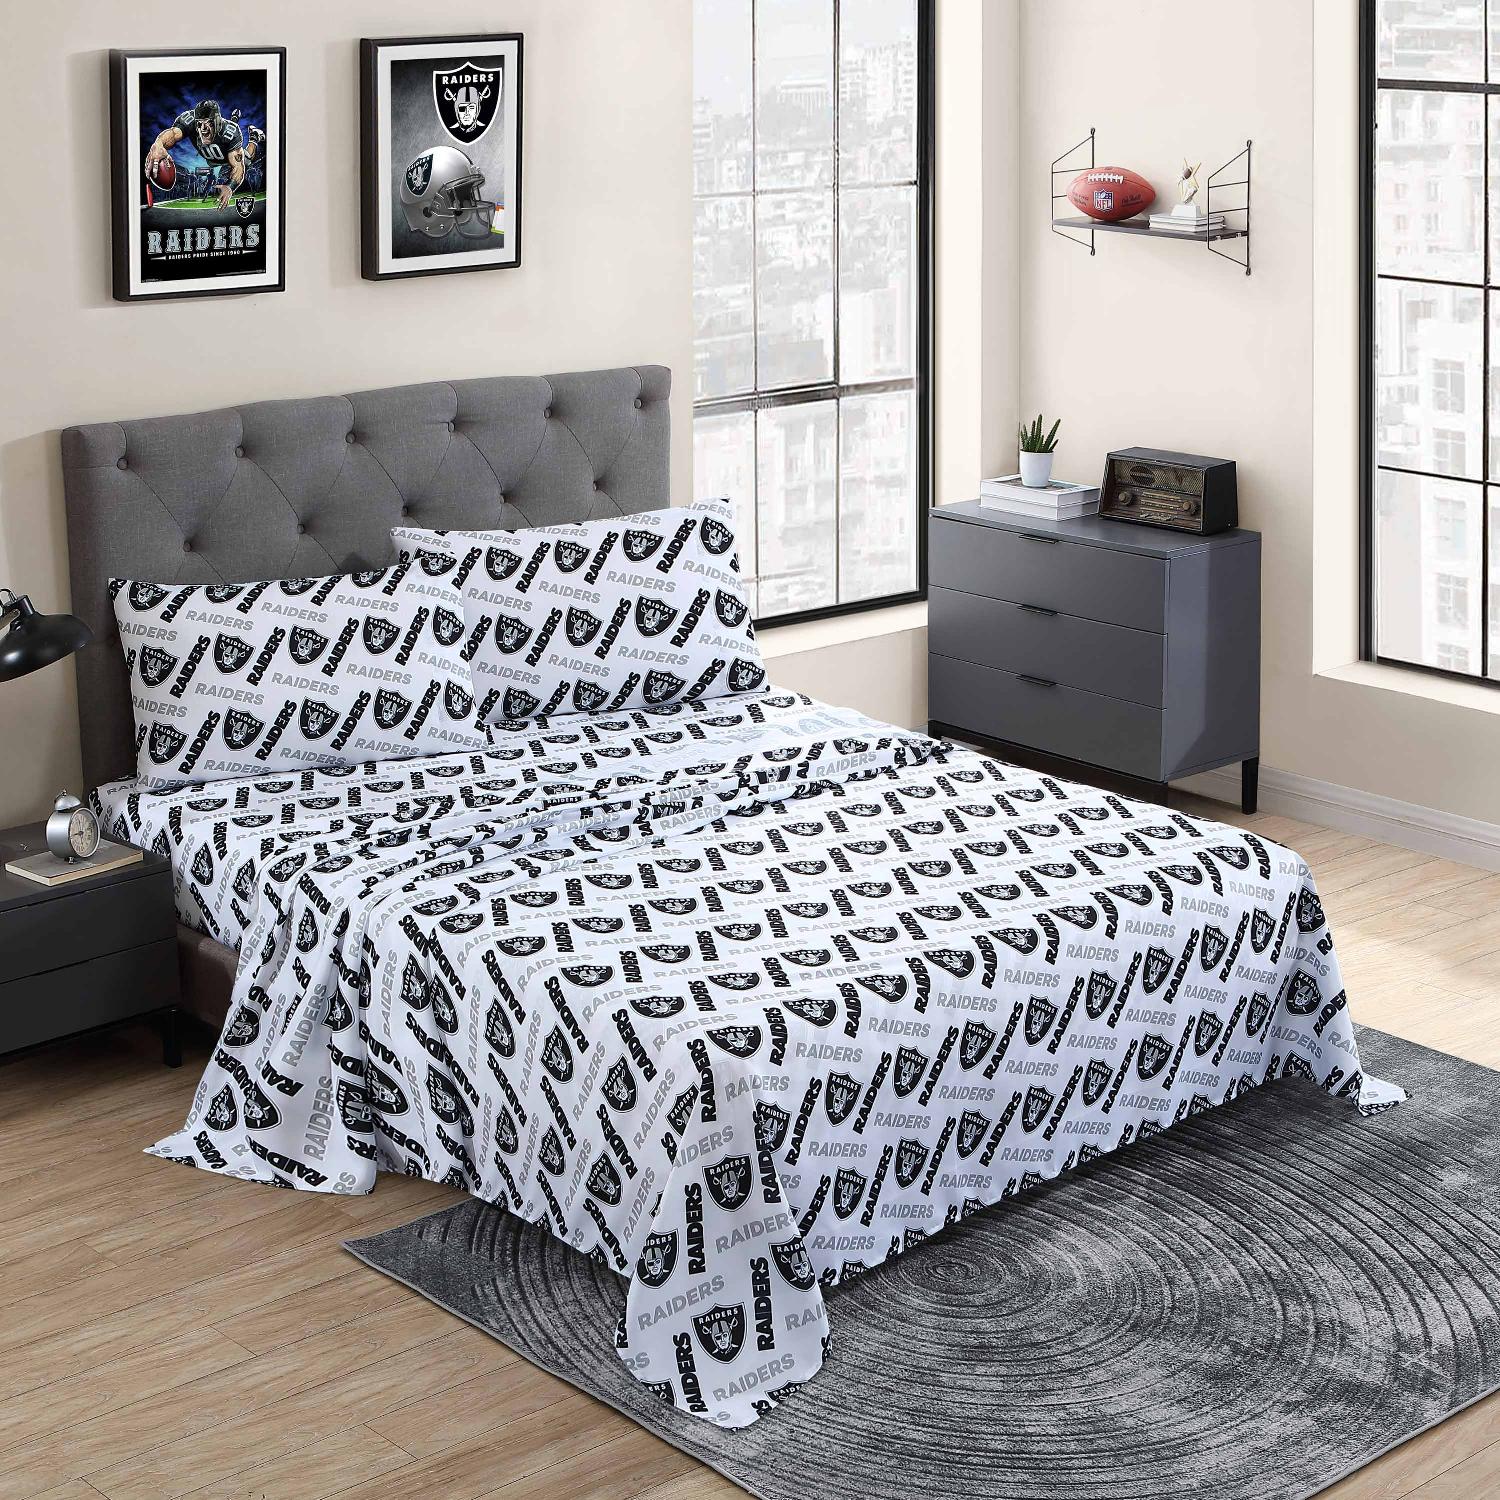 Las Vegas Raiders NFL Officially Licensed 4-Piece Sheet Set - Bed